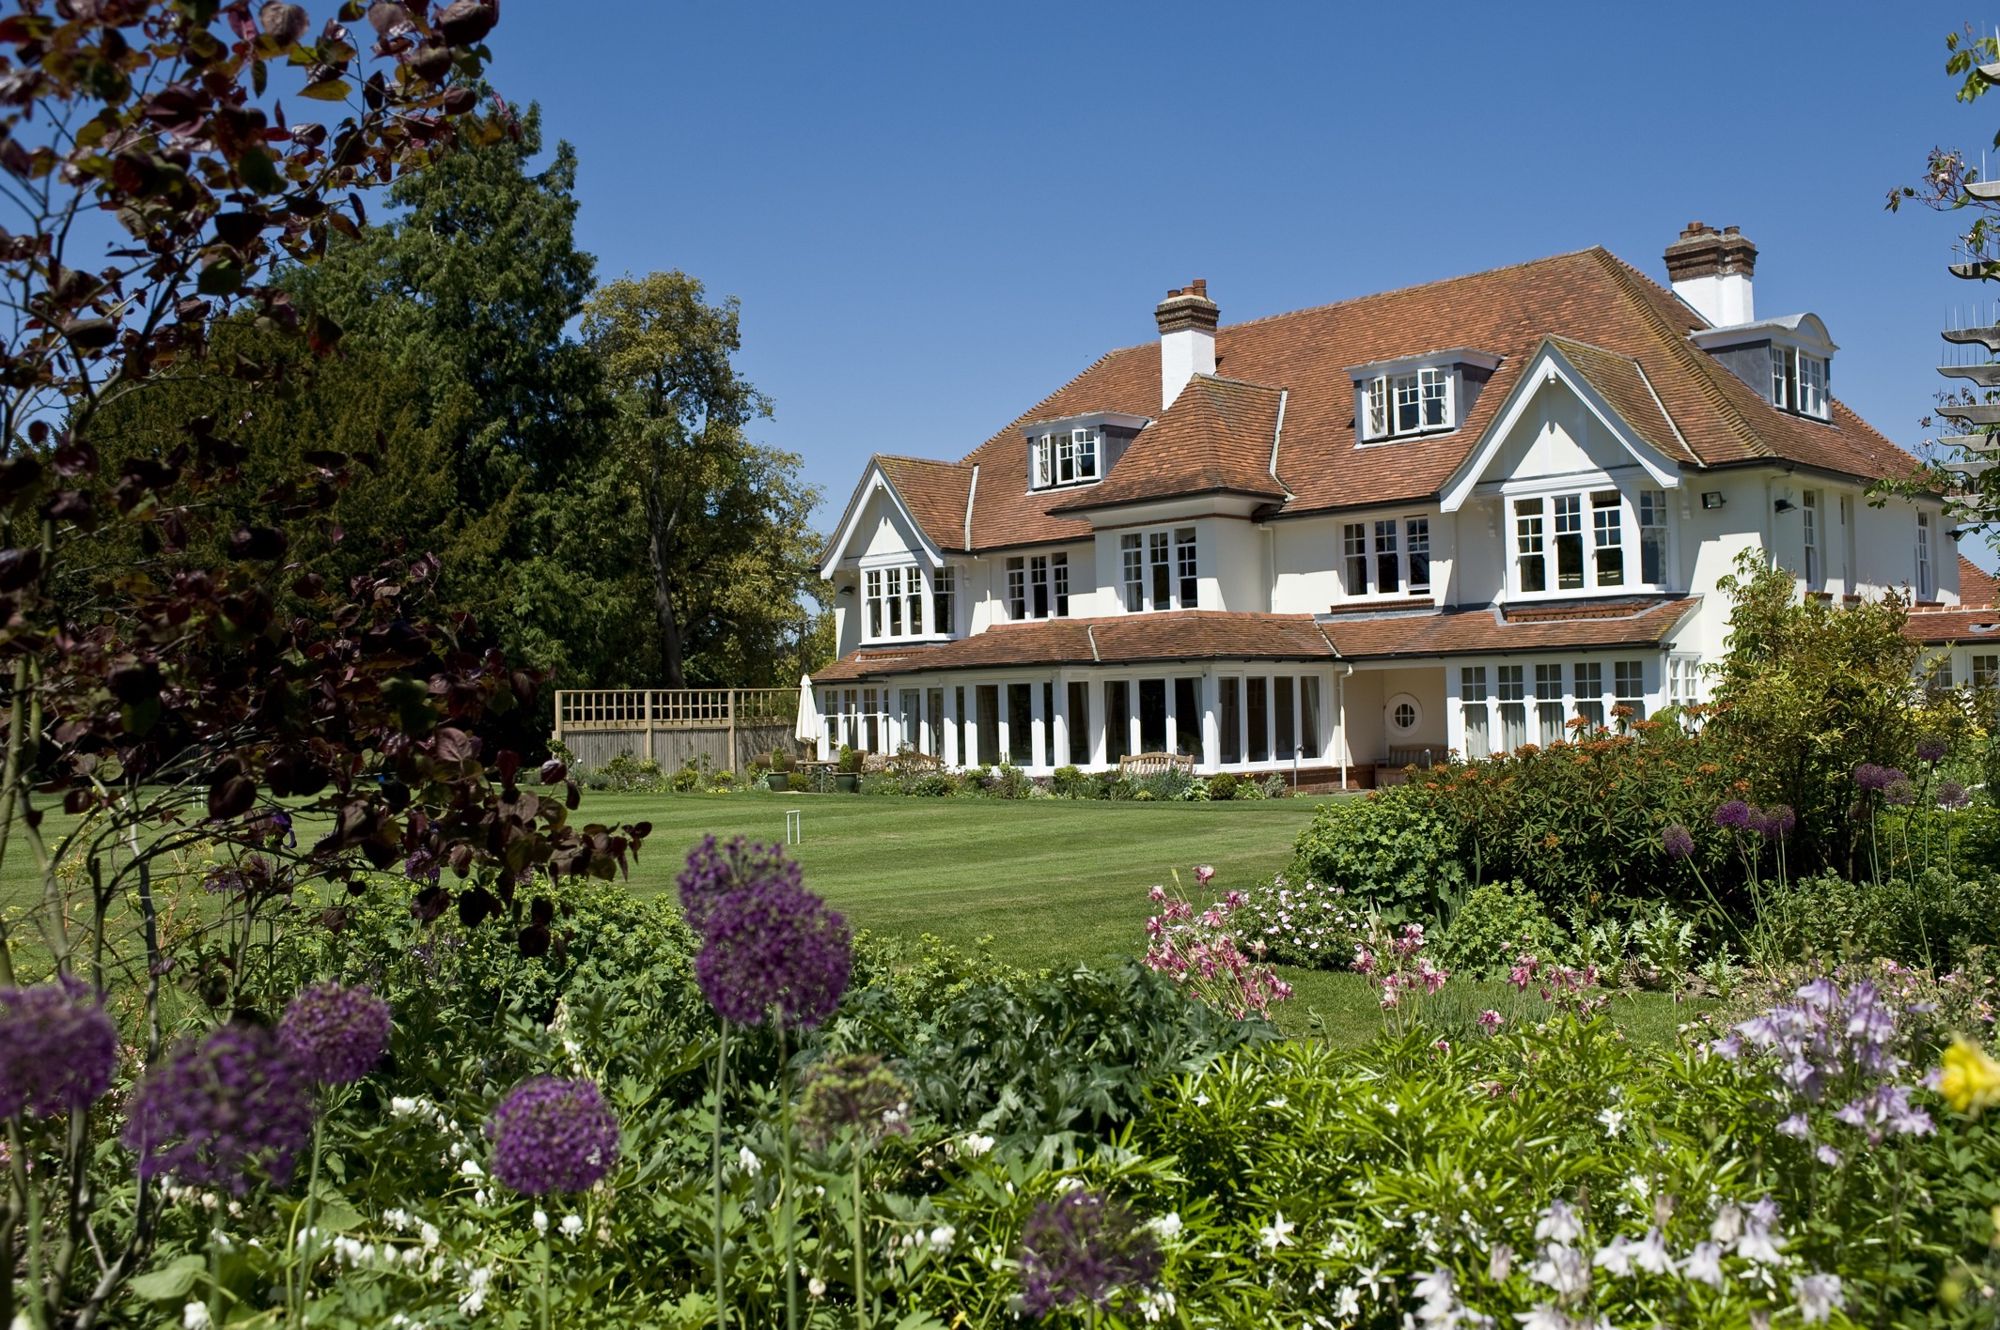 Hotels in Midhurst holidays at Cool Places